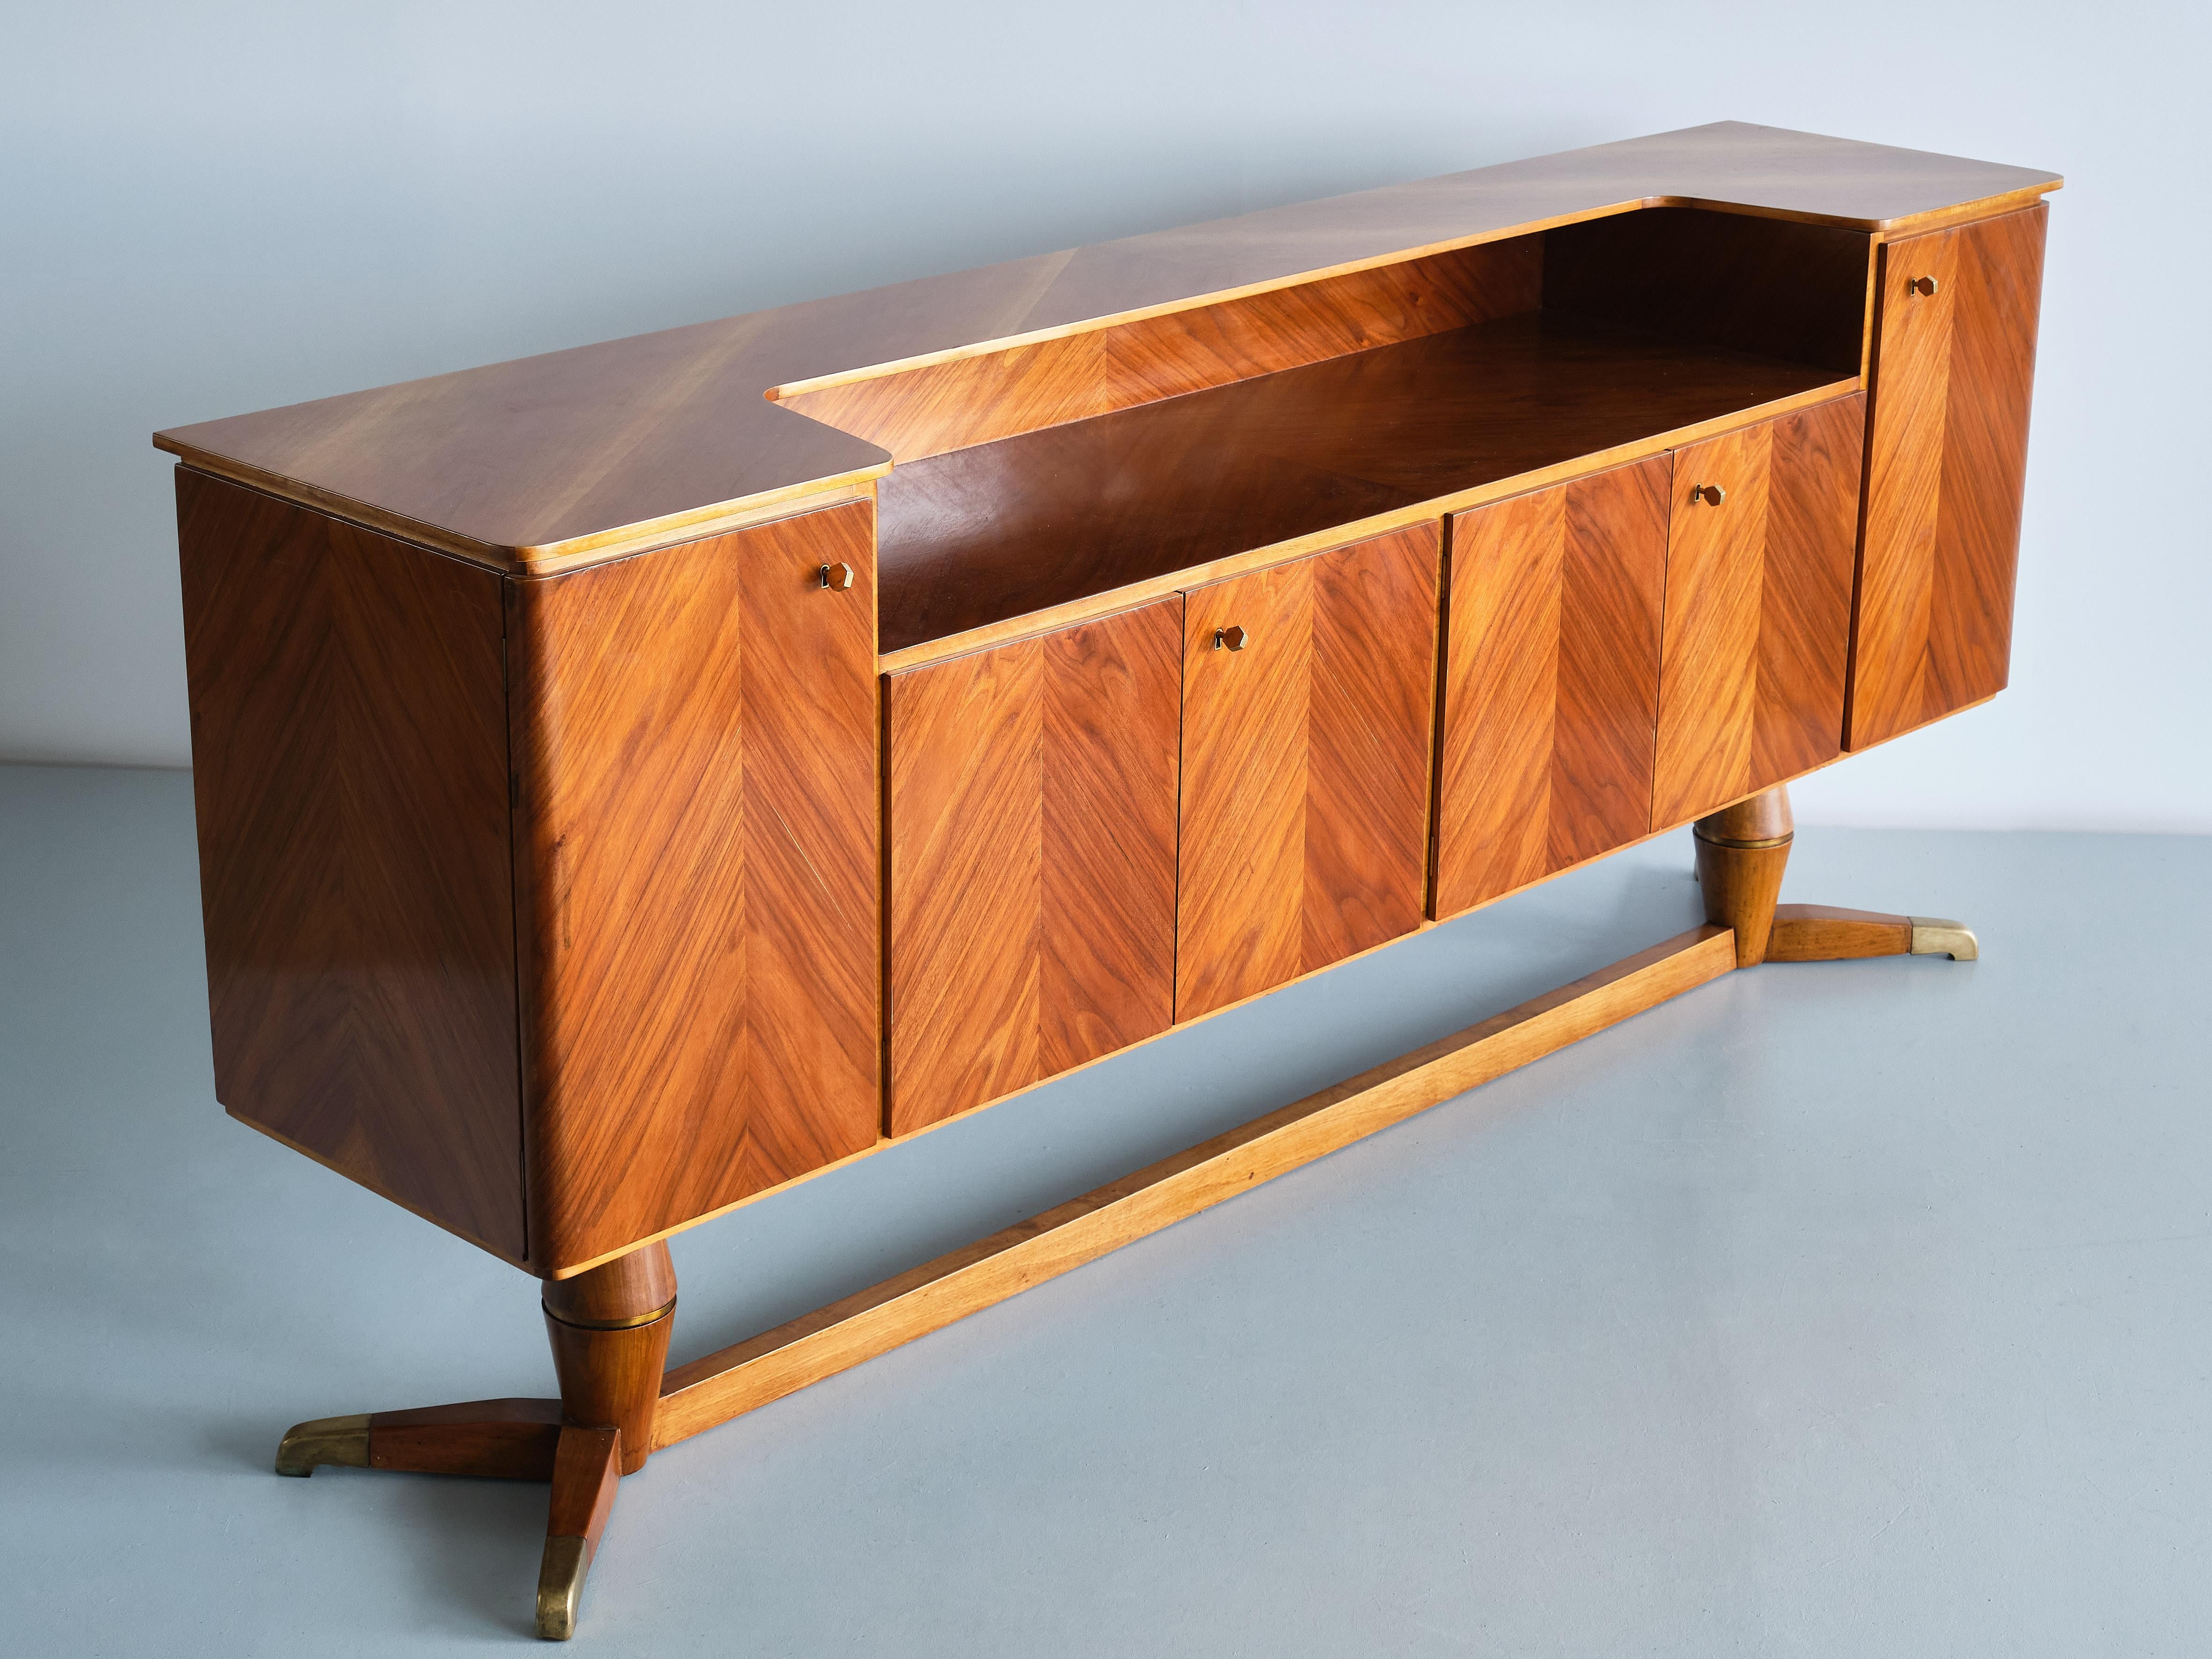 Italian Paolo Buffa Attributed Sideboard in Walnut and Brass, Serafino Arrighi, 1940s For Sale